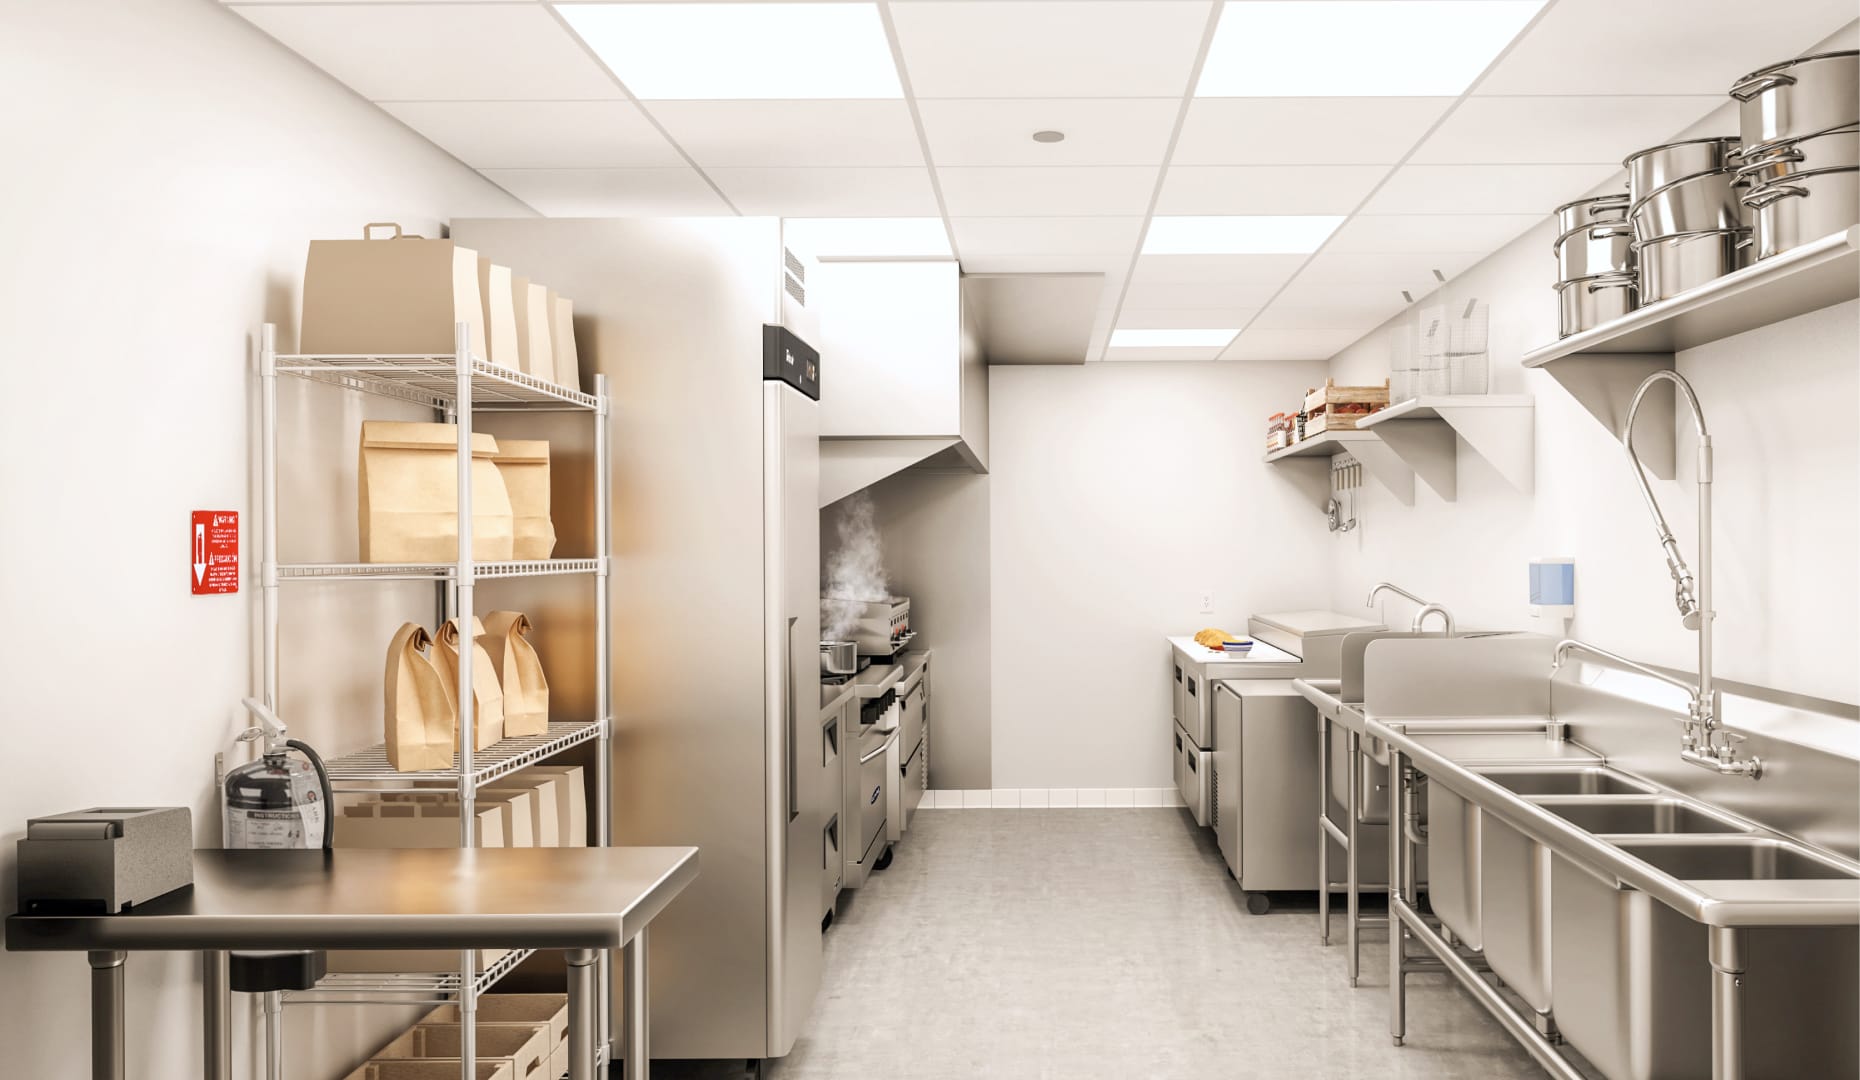 Commercial Kitchens Built for Delivery   CloudKitchens